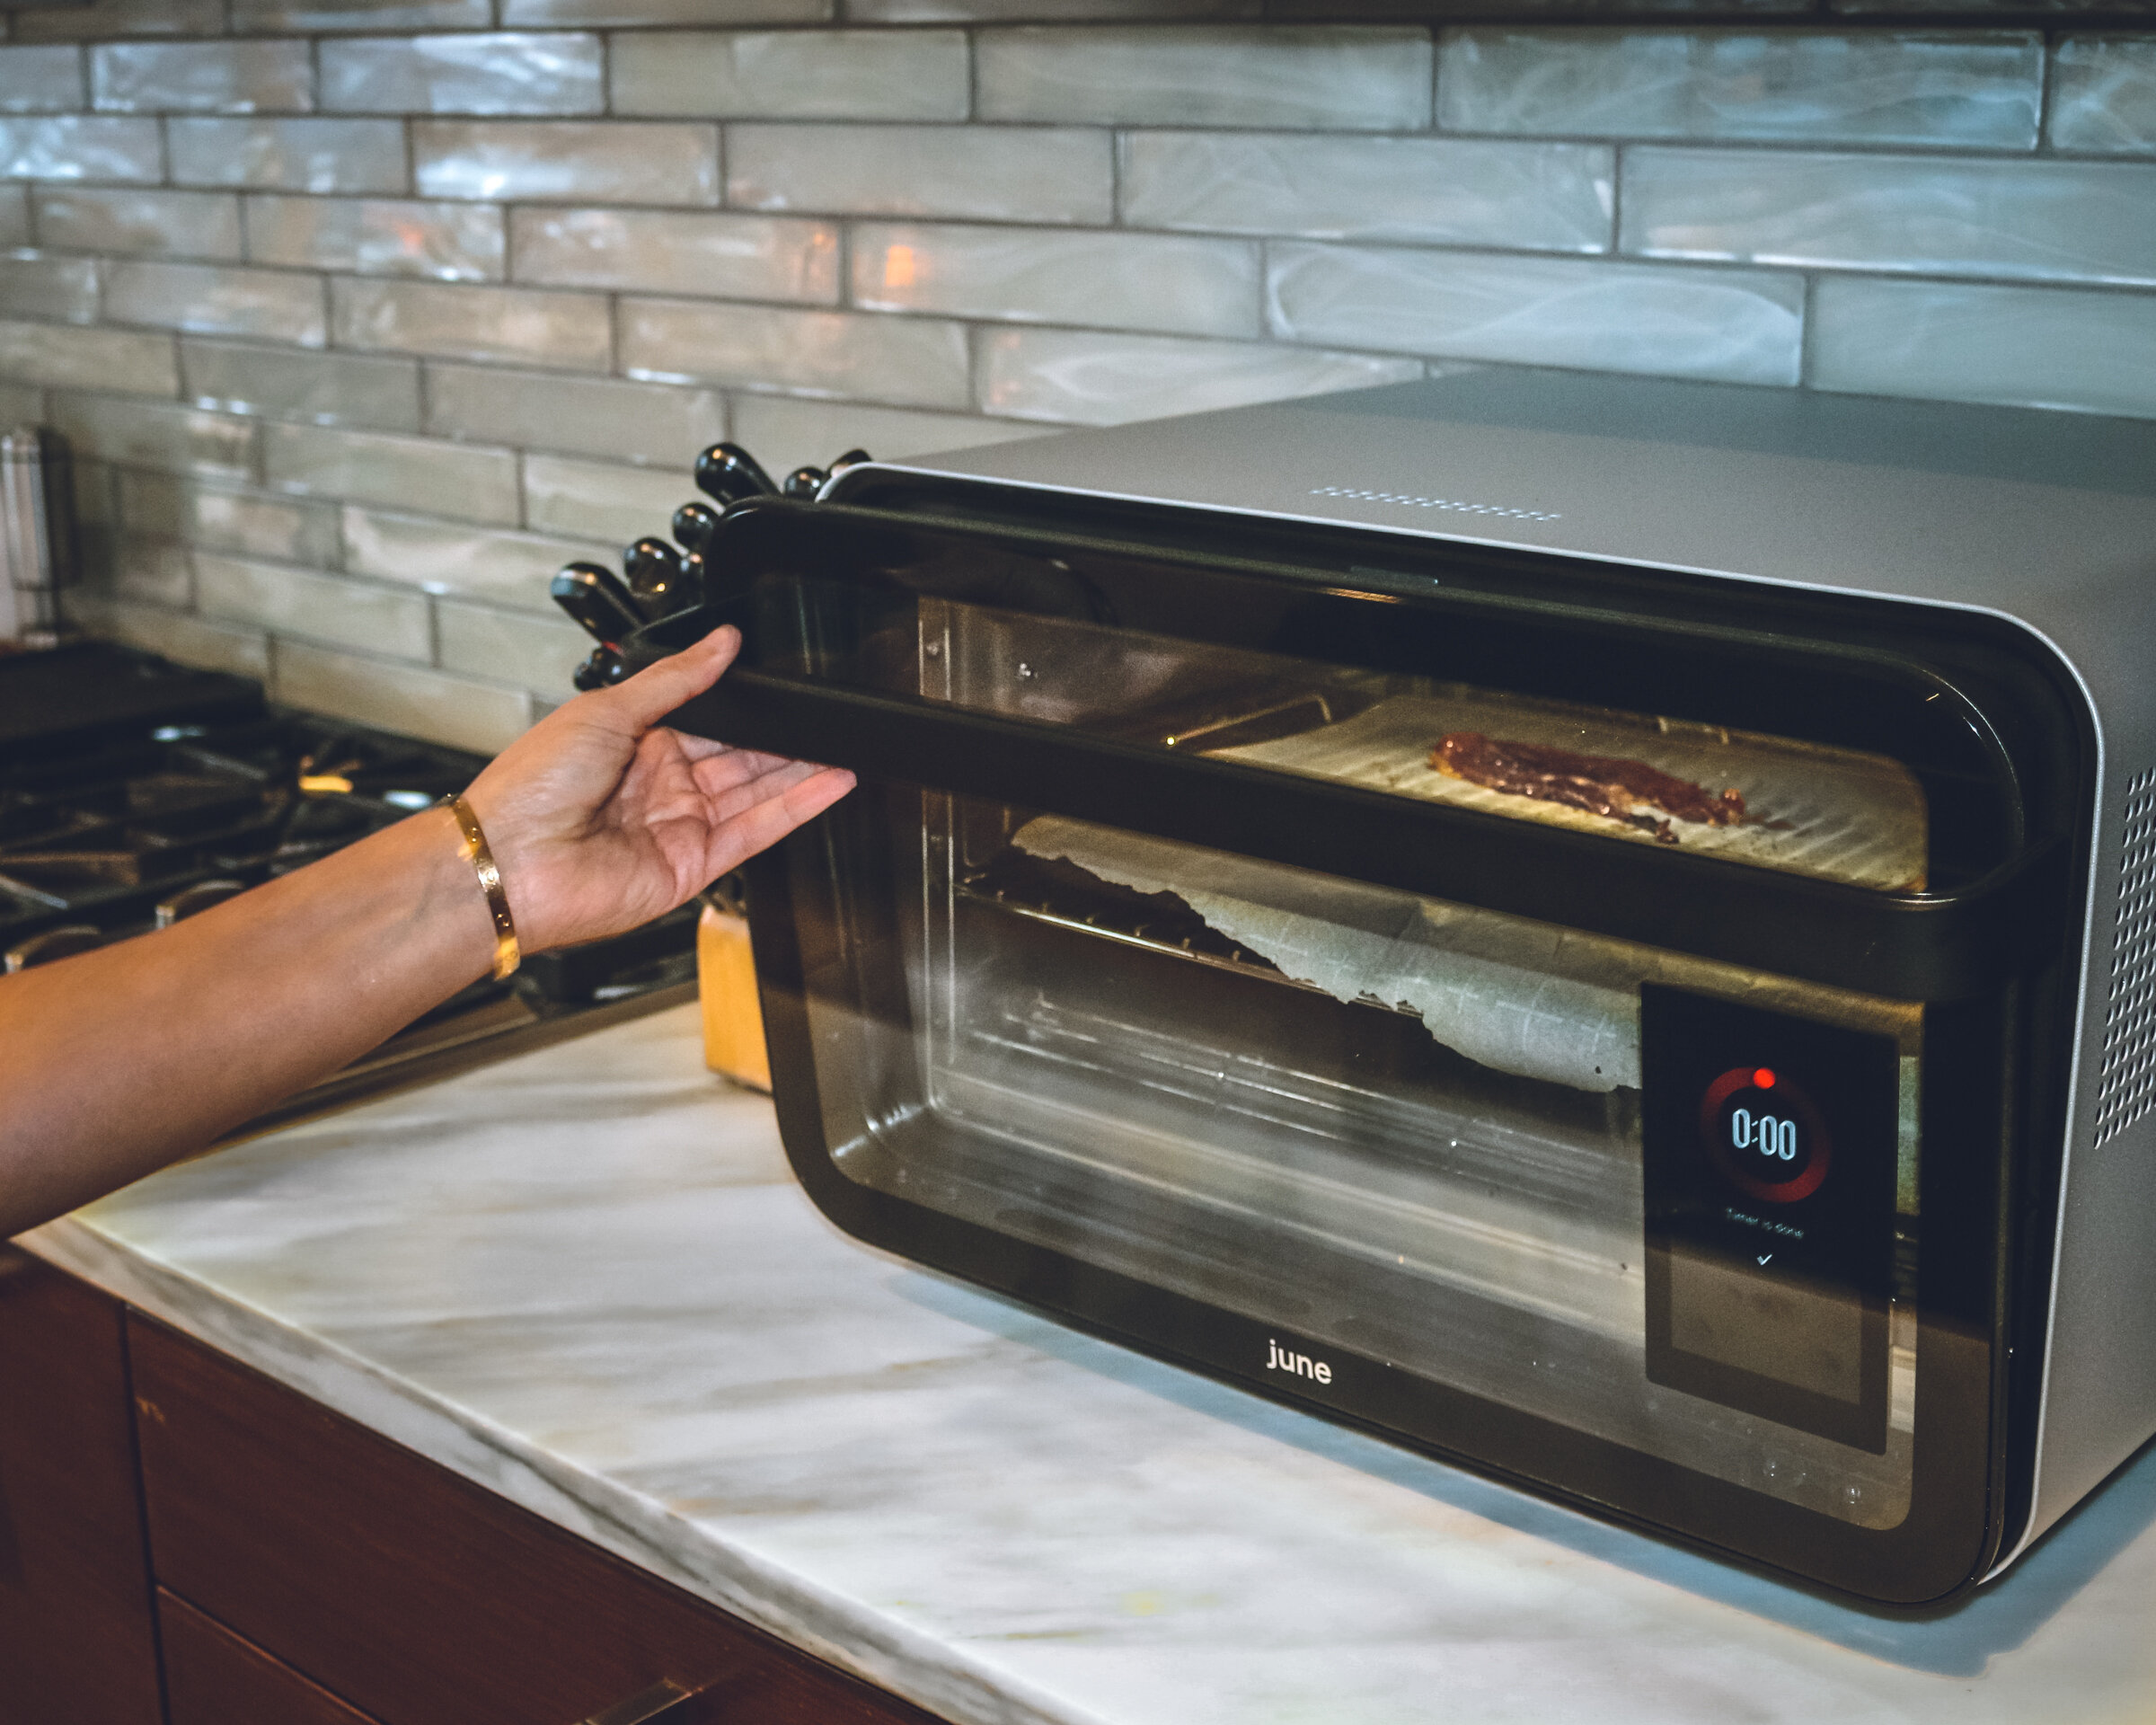 The June Oven makes cooking an exact science